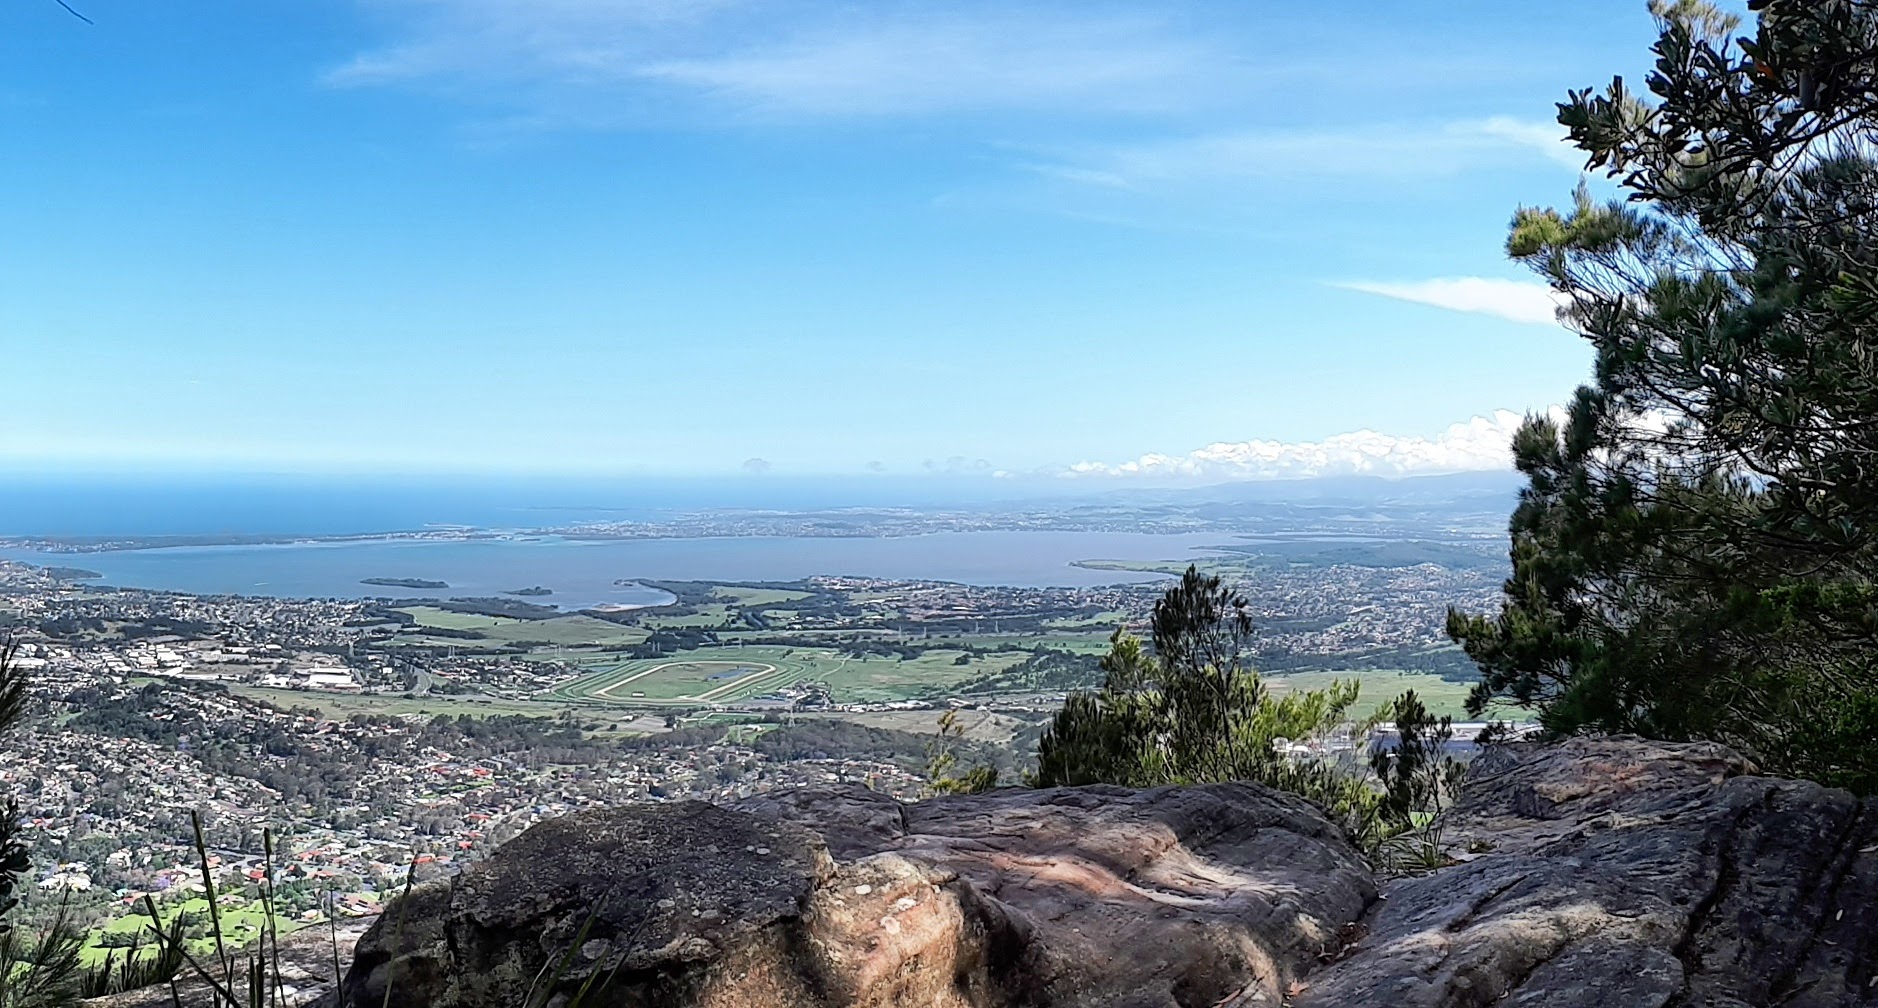 Spectacular views from Mt Kembla Summit, taking in Lake Illawarra and the gorgeous Wollongong coastline.